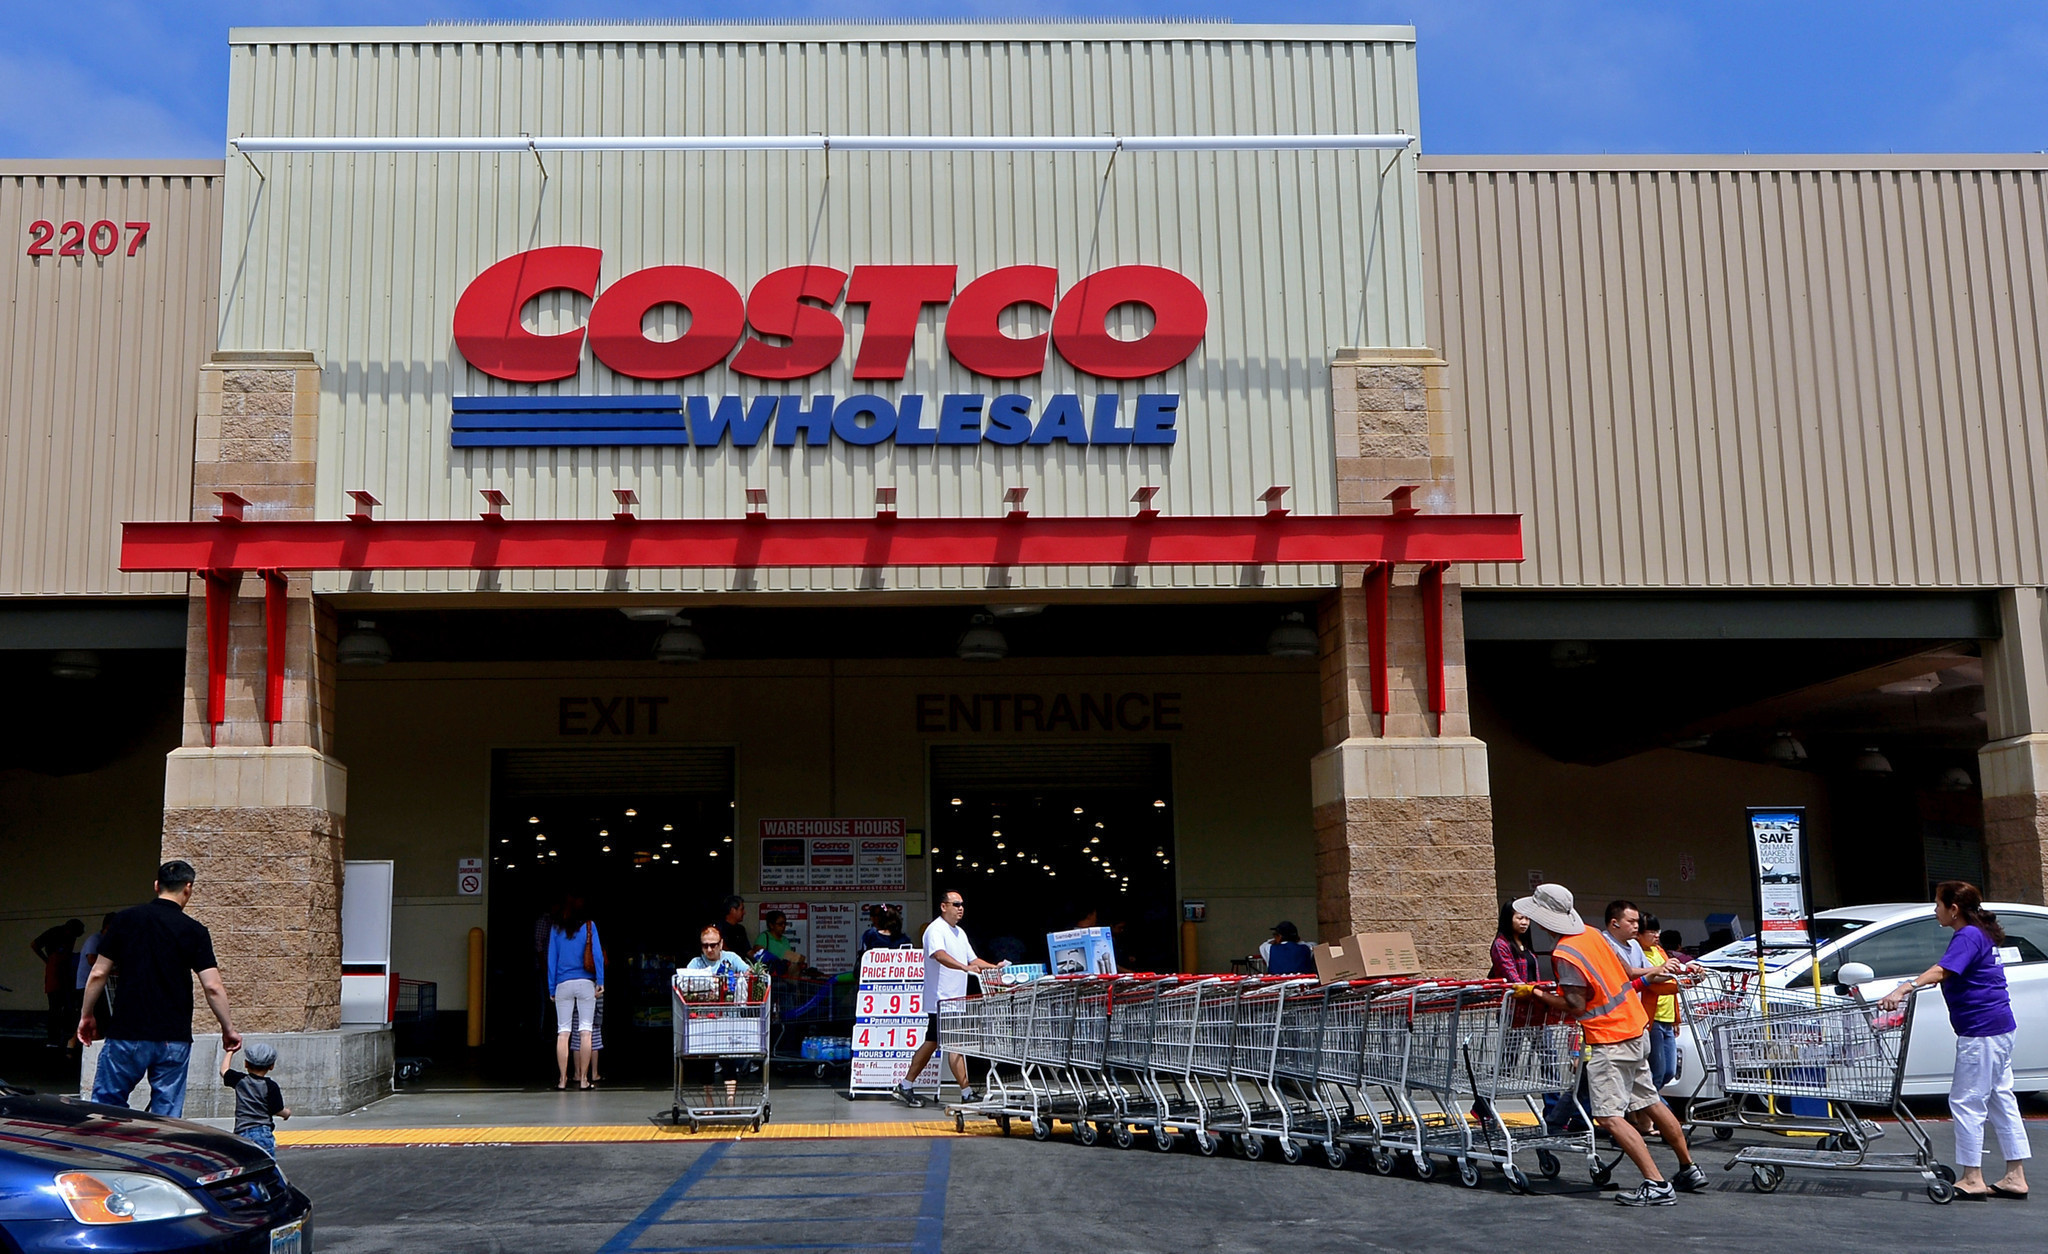 costco-credit-card-switch-a-headache-for-some-shoppers-chicago-tribune